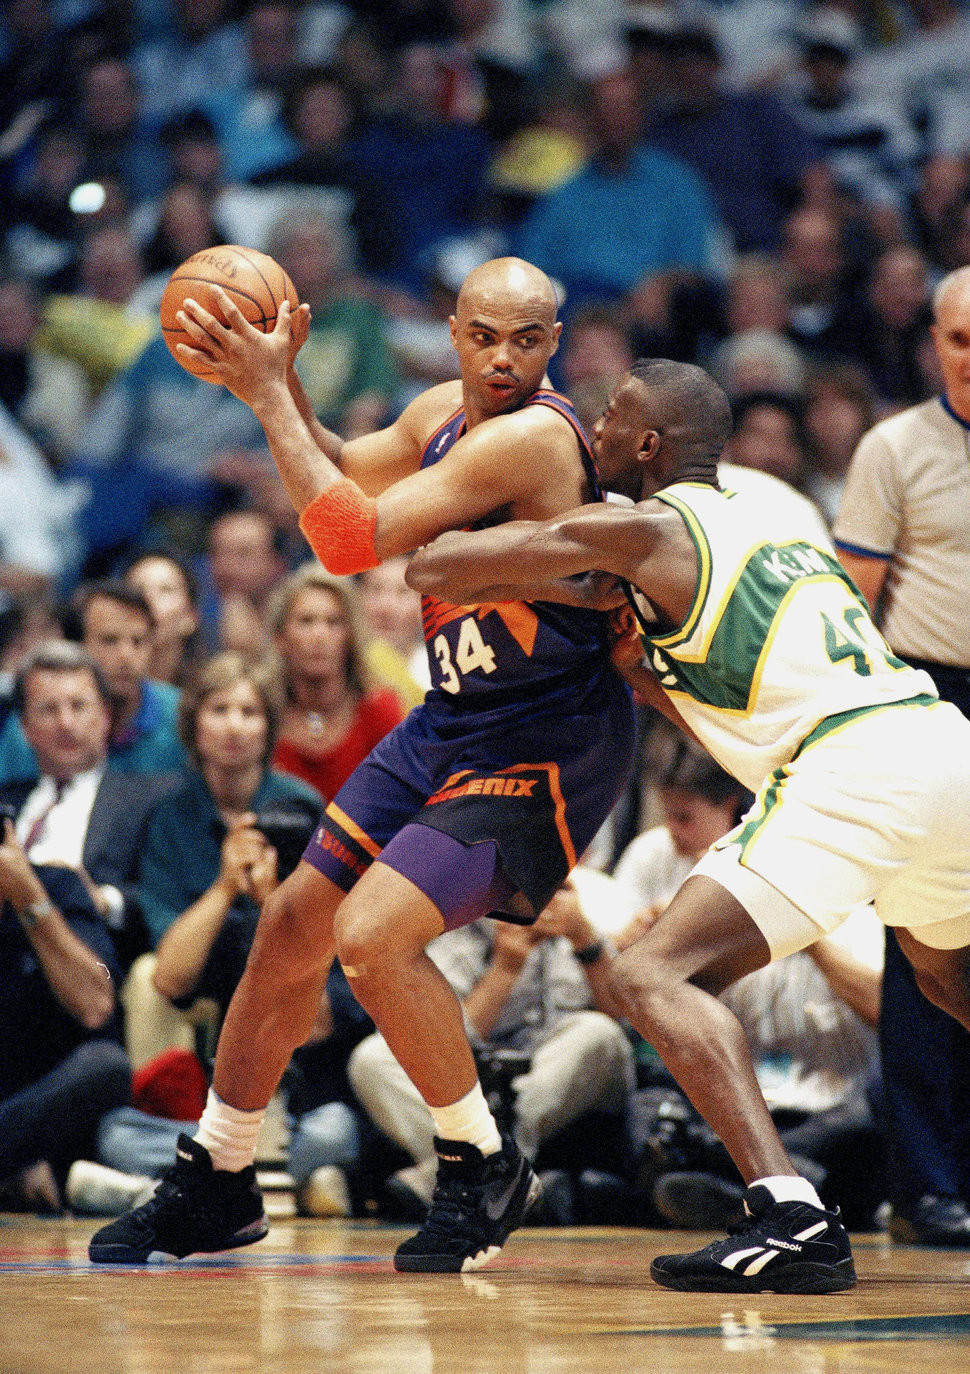 Charles Barkley's tendency to methodically back his opponents down beneath the basket prompted what was known as "The Barkley